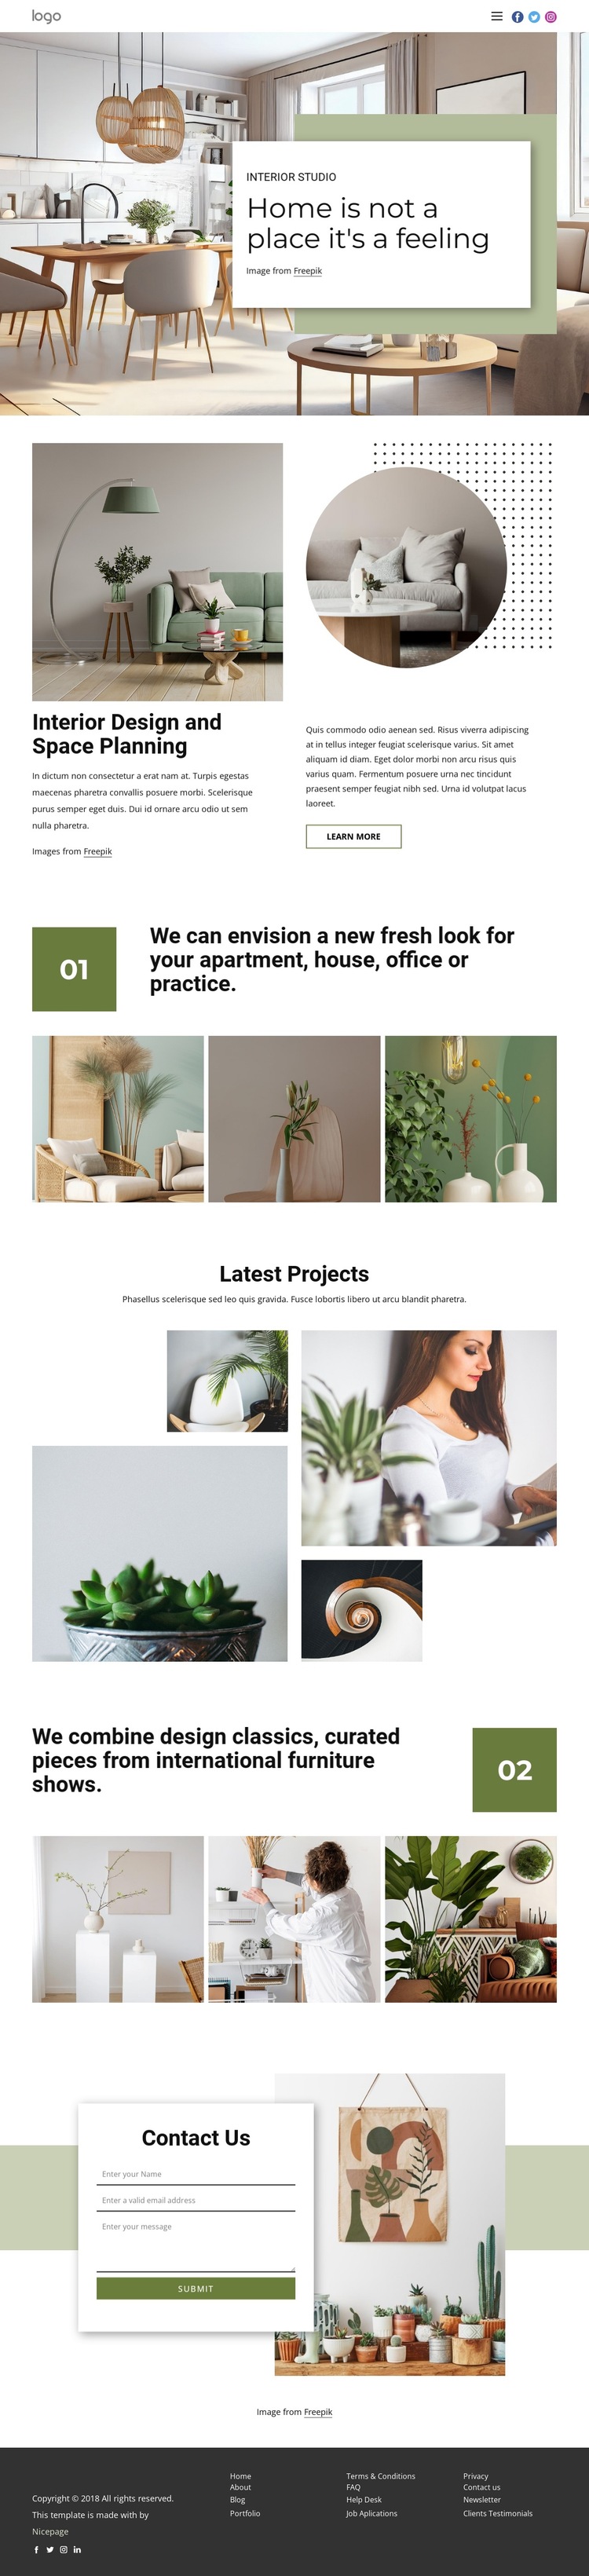 Interior designs for every taste HTML5 Template